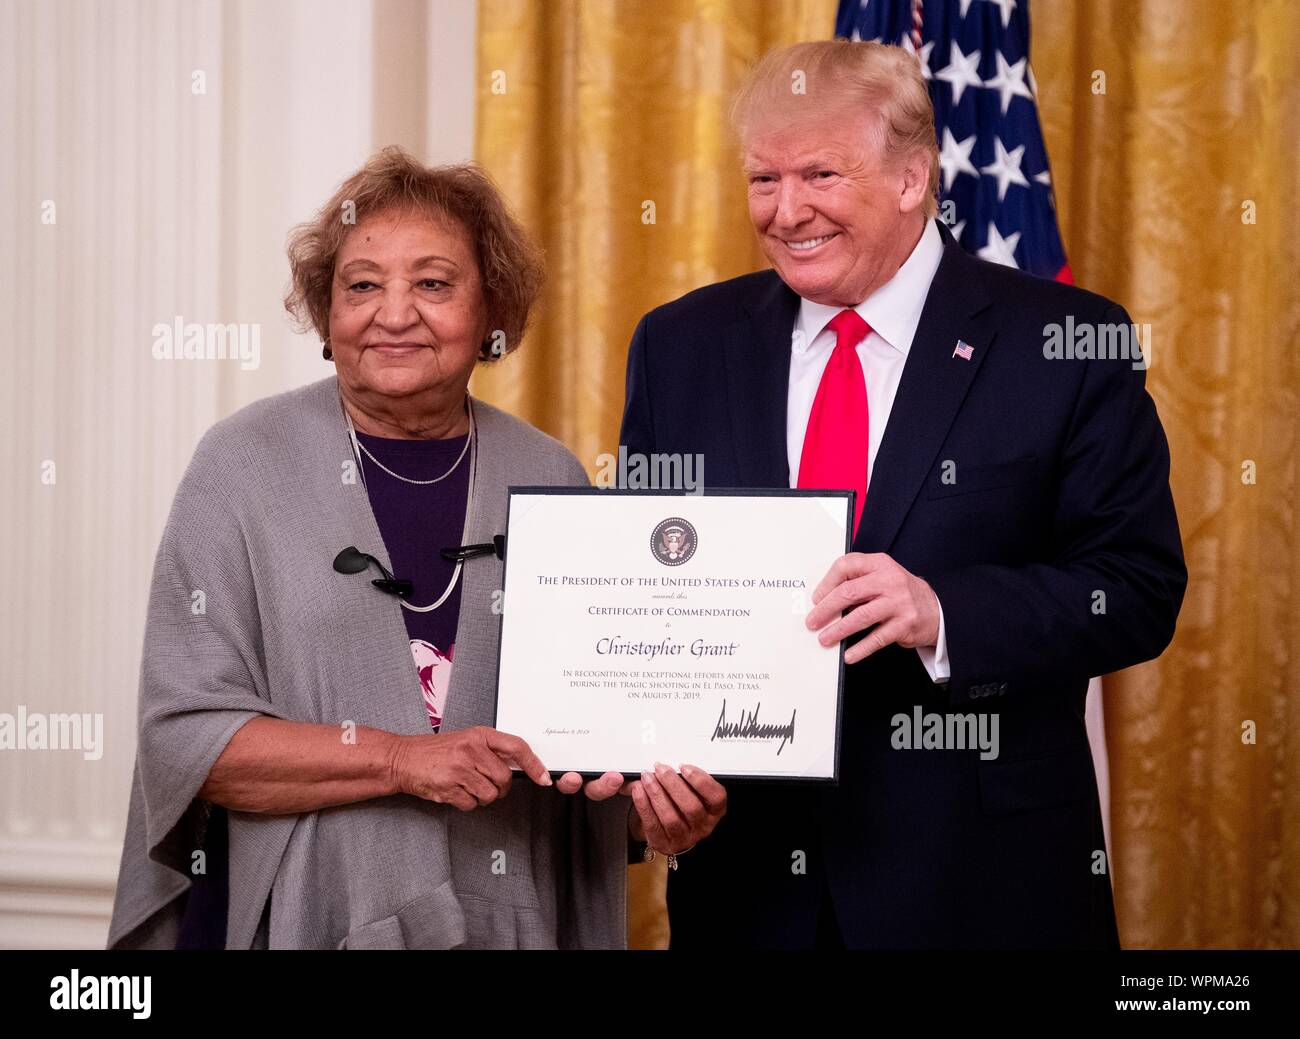 Washington, United States. 09th Sep, 2019. President Donald Trump awards a Heroic Commendations to Christoper Grant for his heroic actions during a mass shooting, as his mother Mimi receives the commendation, during a ceremony in the East Room at the White House in Washington, DC on Monday, September 9, 2019. Trump recognized the six Dayton officers who stoped a mass shooting on August 4th and honored 5 civilians who helped during a mass shooting at a Walmart in El Paso a day before. Photo by Kevin Dietsch/UPI Credit: UPI/Alamy Live News Stock Photo